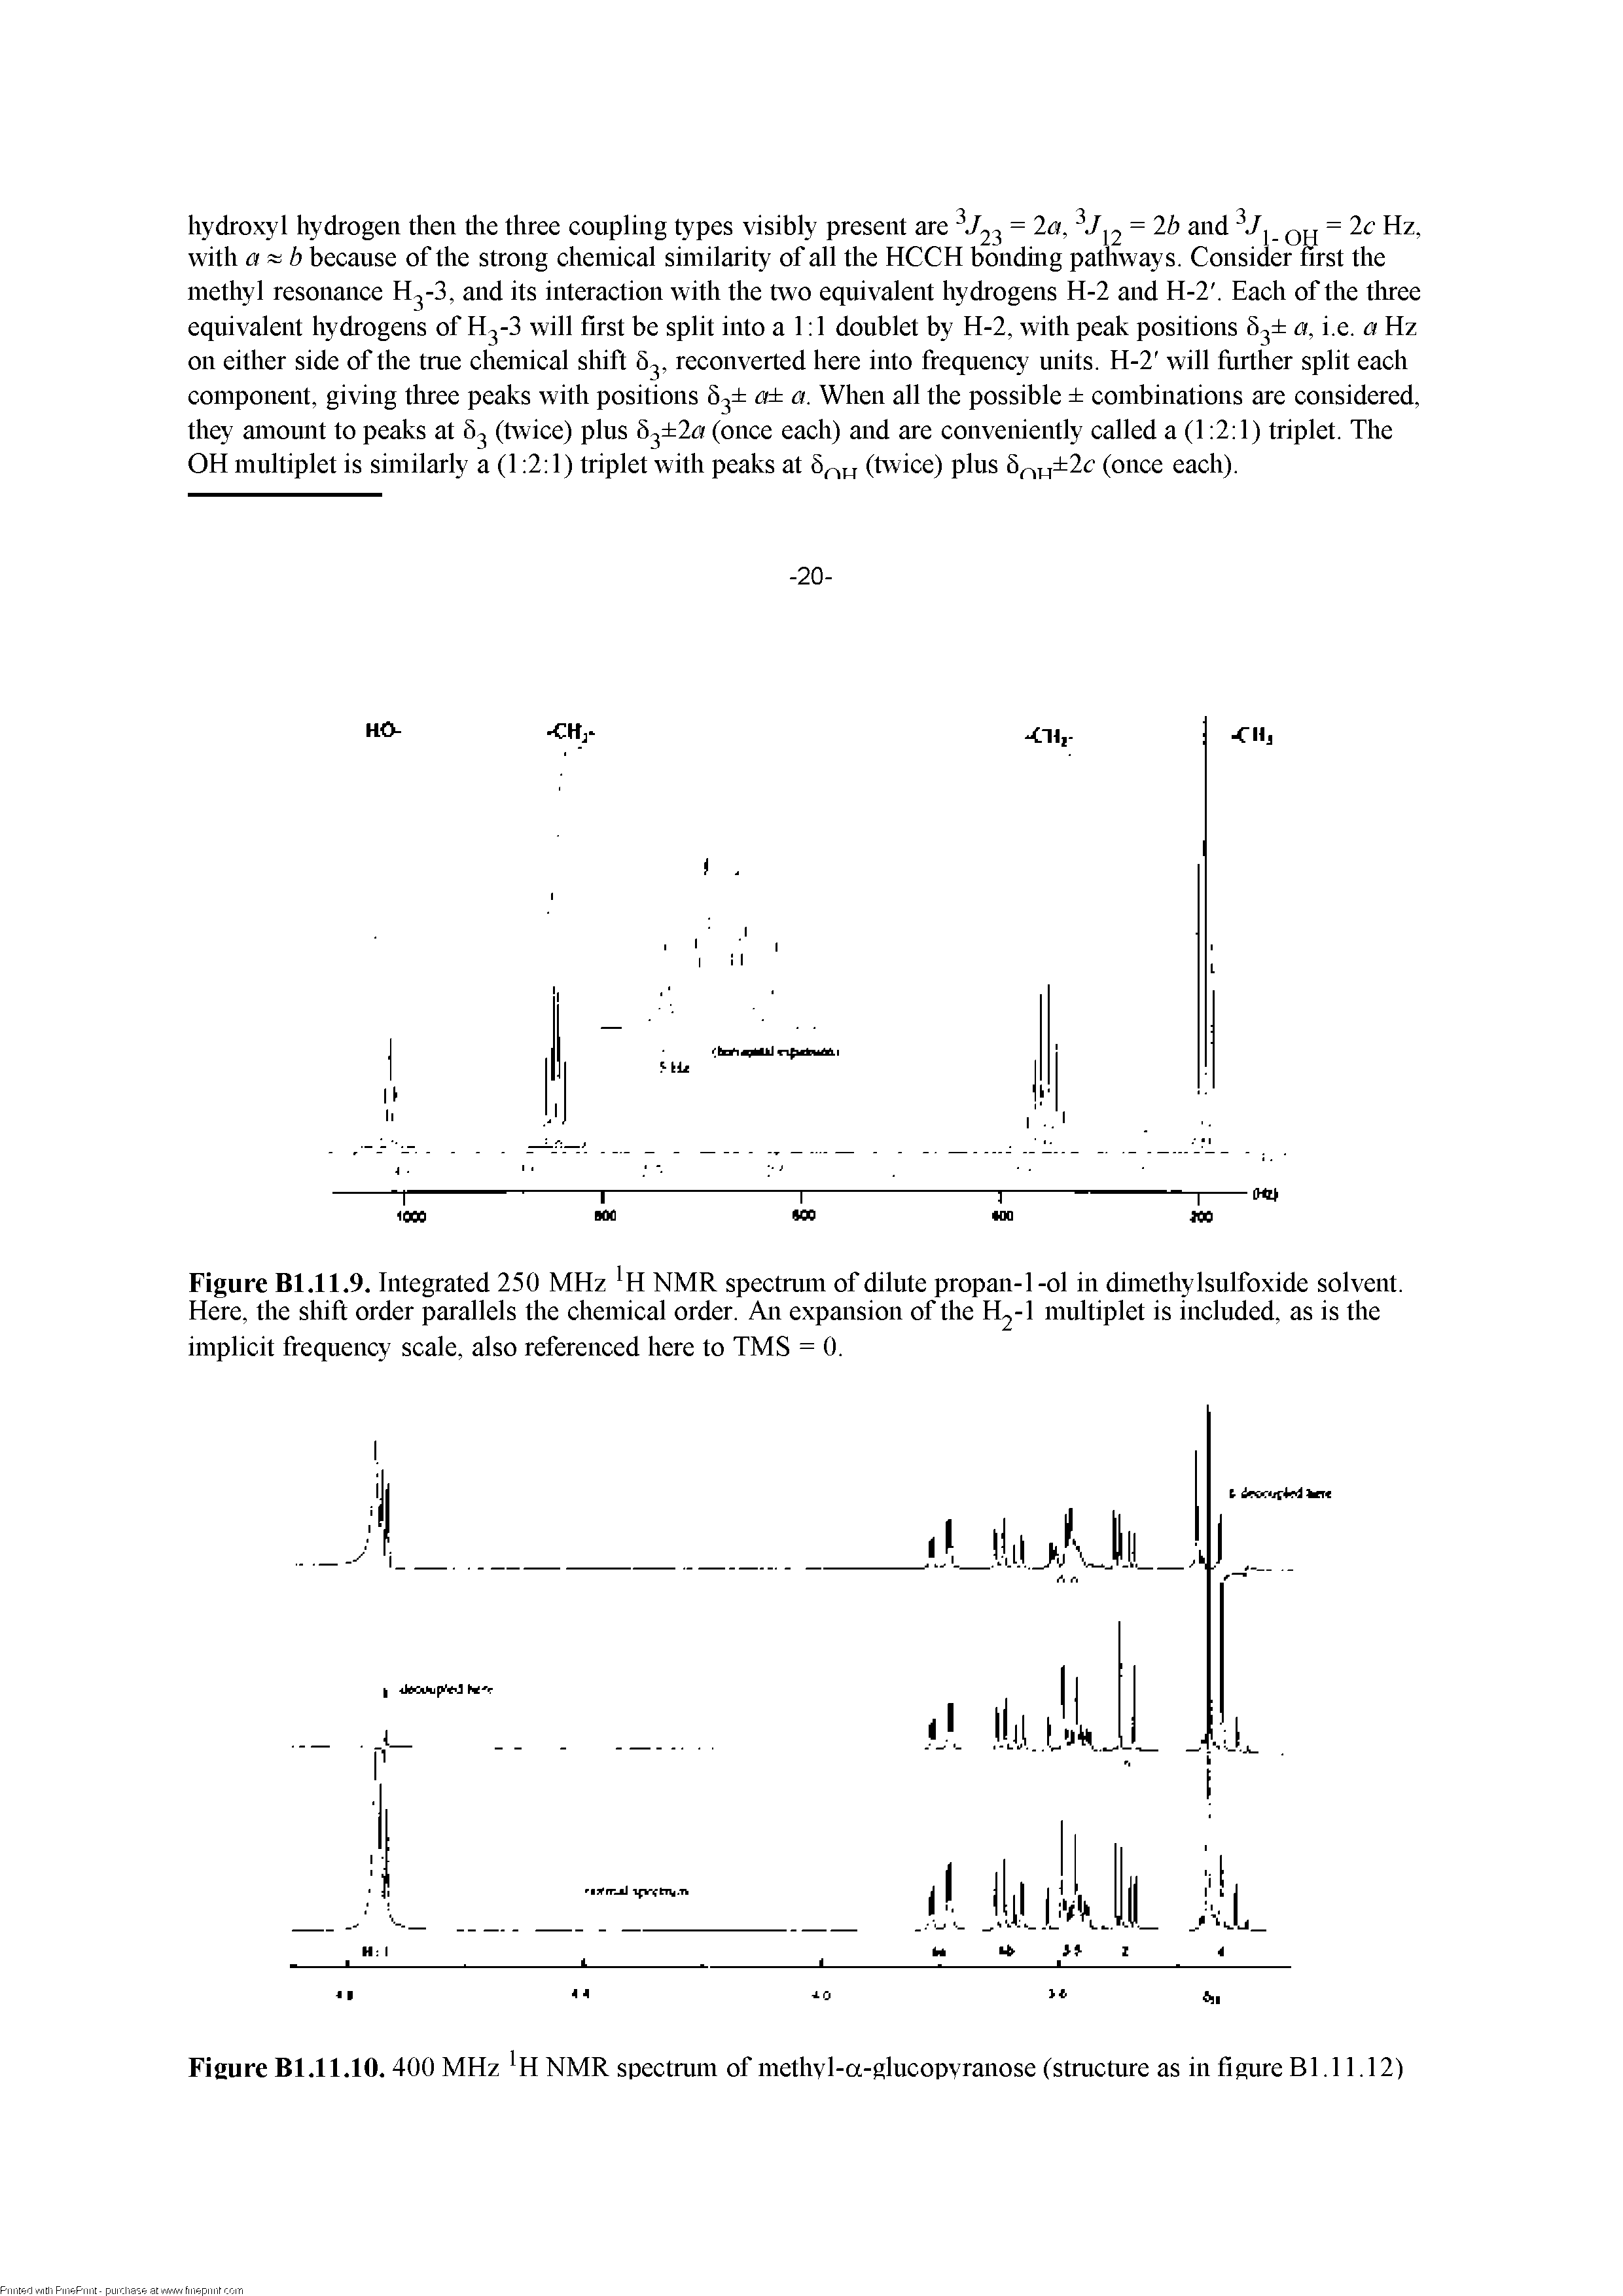 Figure Bl.11.9. Integrated 250 MHz H NMR spectrum of dilute propan-1-ol in dinrethylsulfoxide solvent. Here, the shift order parallels the chemical order. Arr expansion of the H2-I nrultiplet is included, as is the implicit frequency scale, also referenced here to TMS = 0.